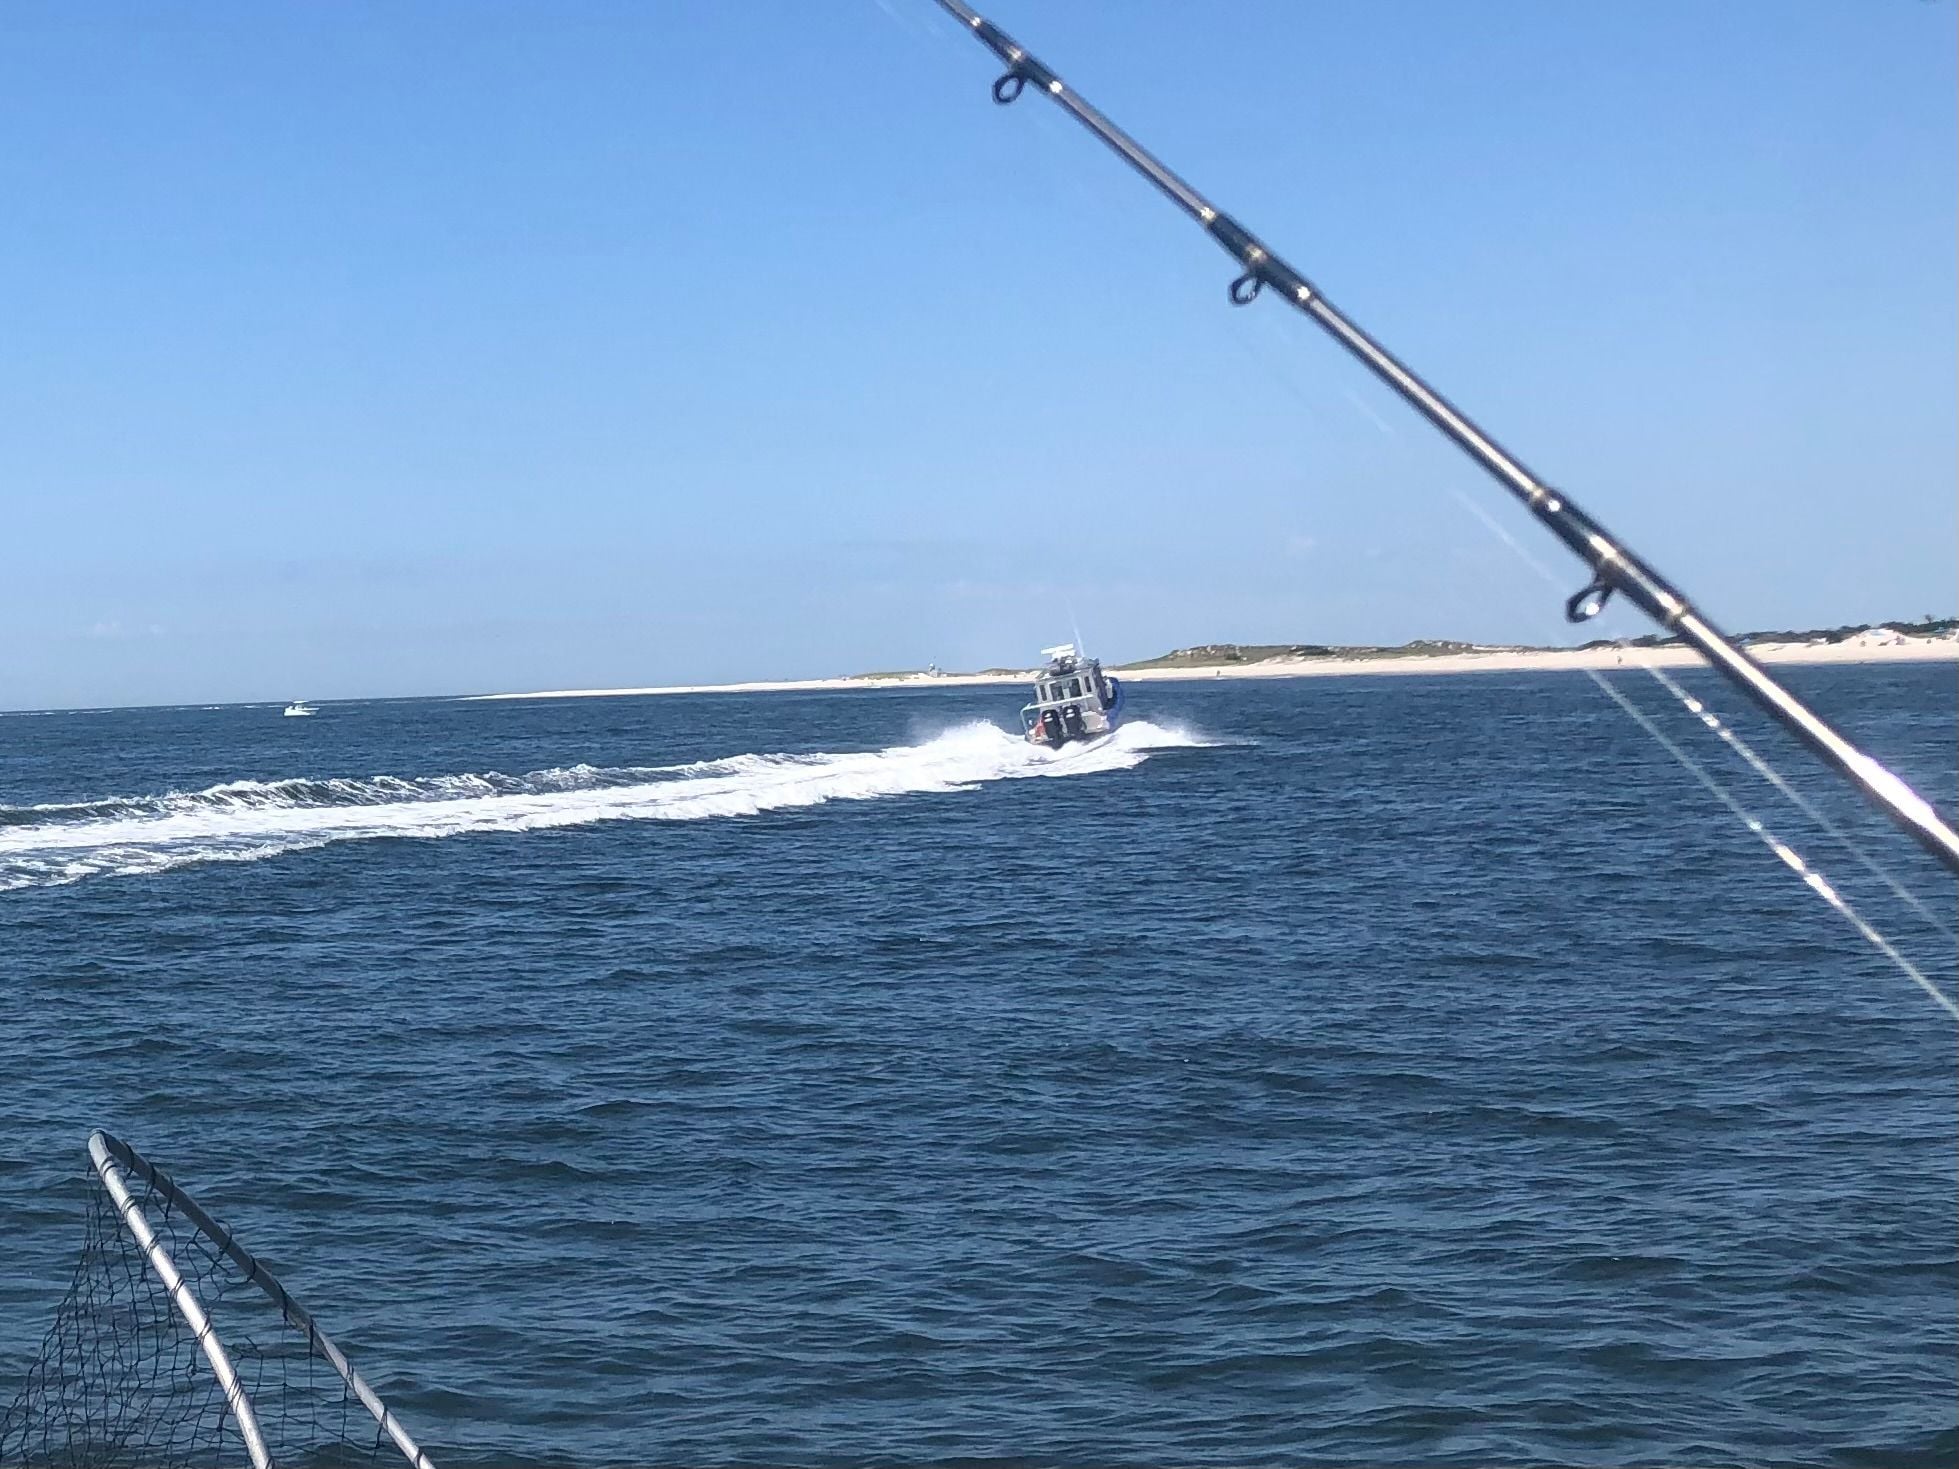 Spear fisher recovered off fire island inlet - The Hull Truth - Boating and  Fishing Forum